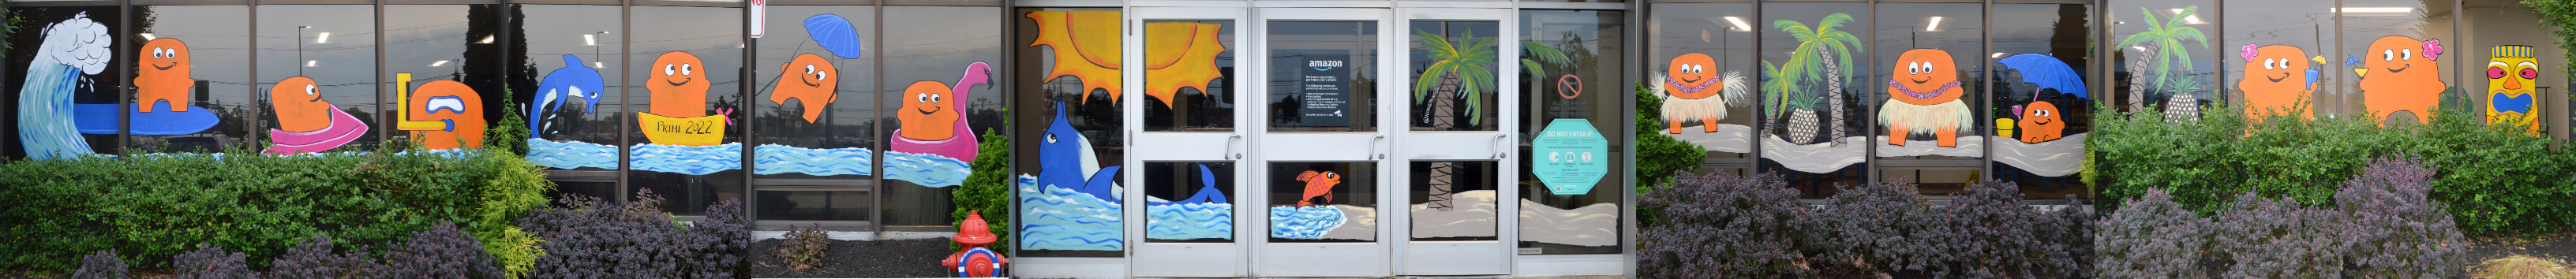 Prime Day Window Painting at the EWR5 Amazon Warehouse in Avenel, Middlesex County, NJ in a Beach and Luau Theme